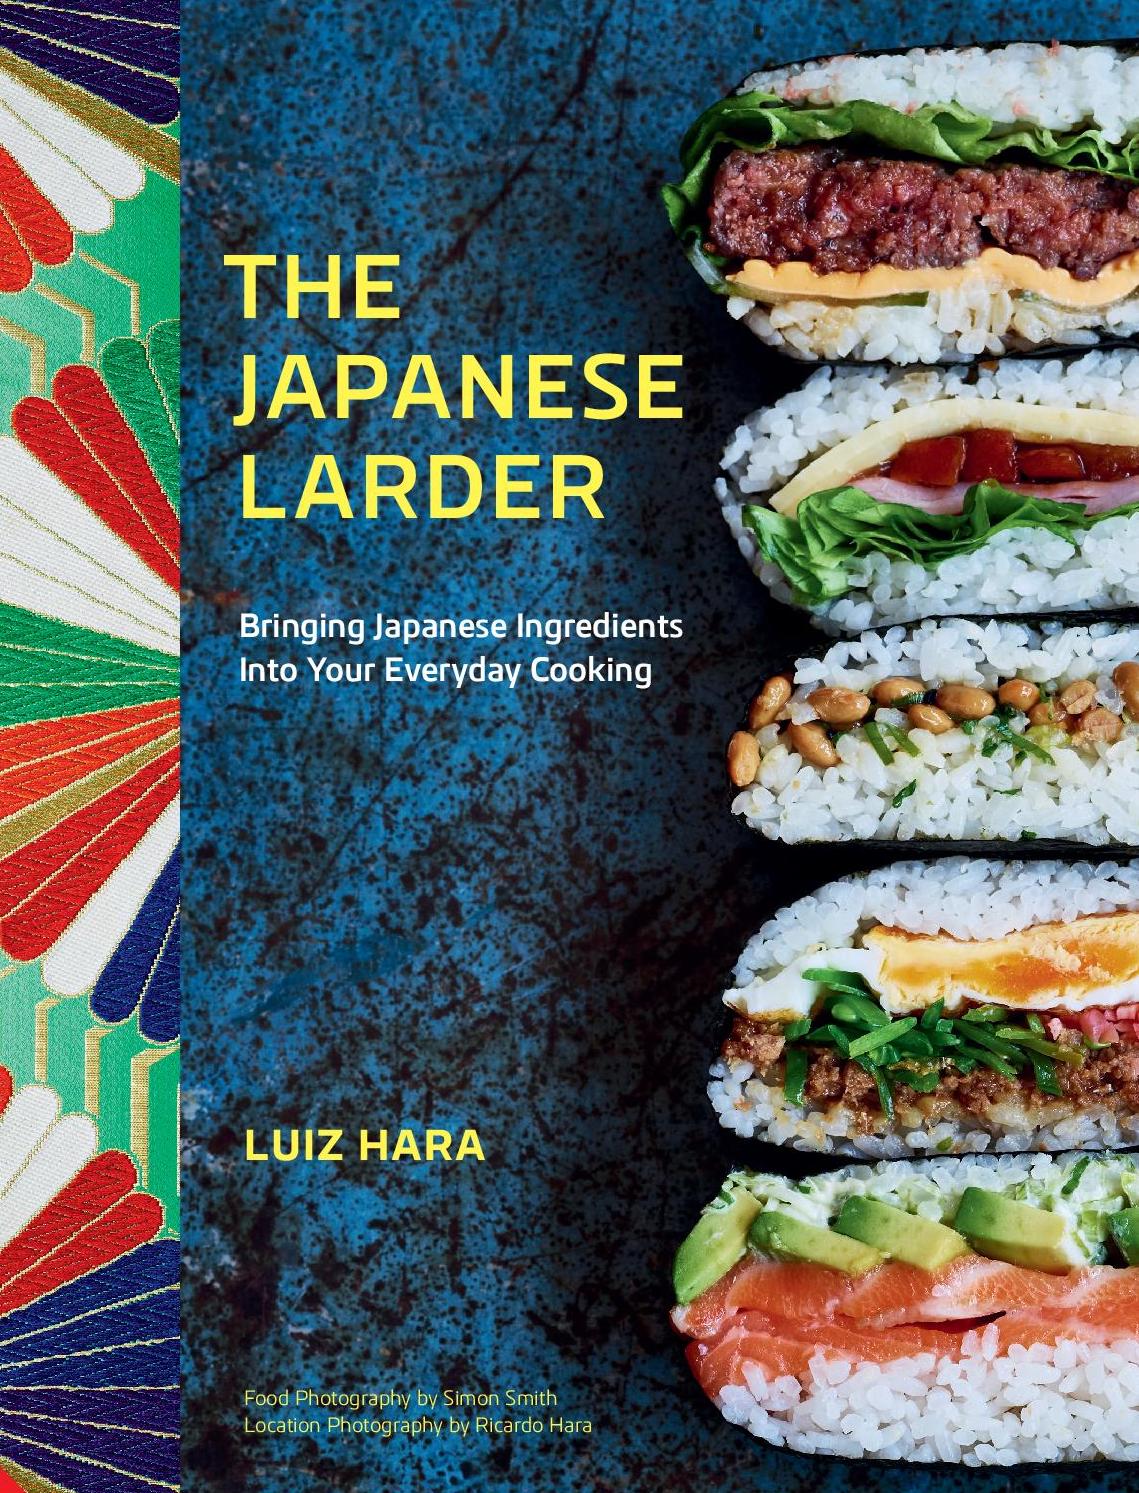 Book Jacket for The Japanese Larder: Bringing Japanese Ingredients into Your Everyday Cooking by Luiz Hara